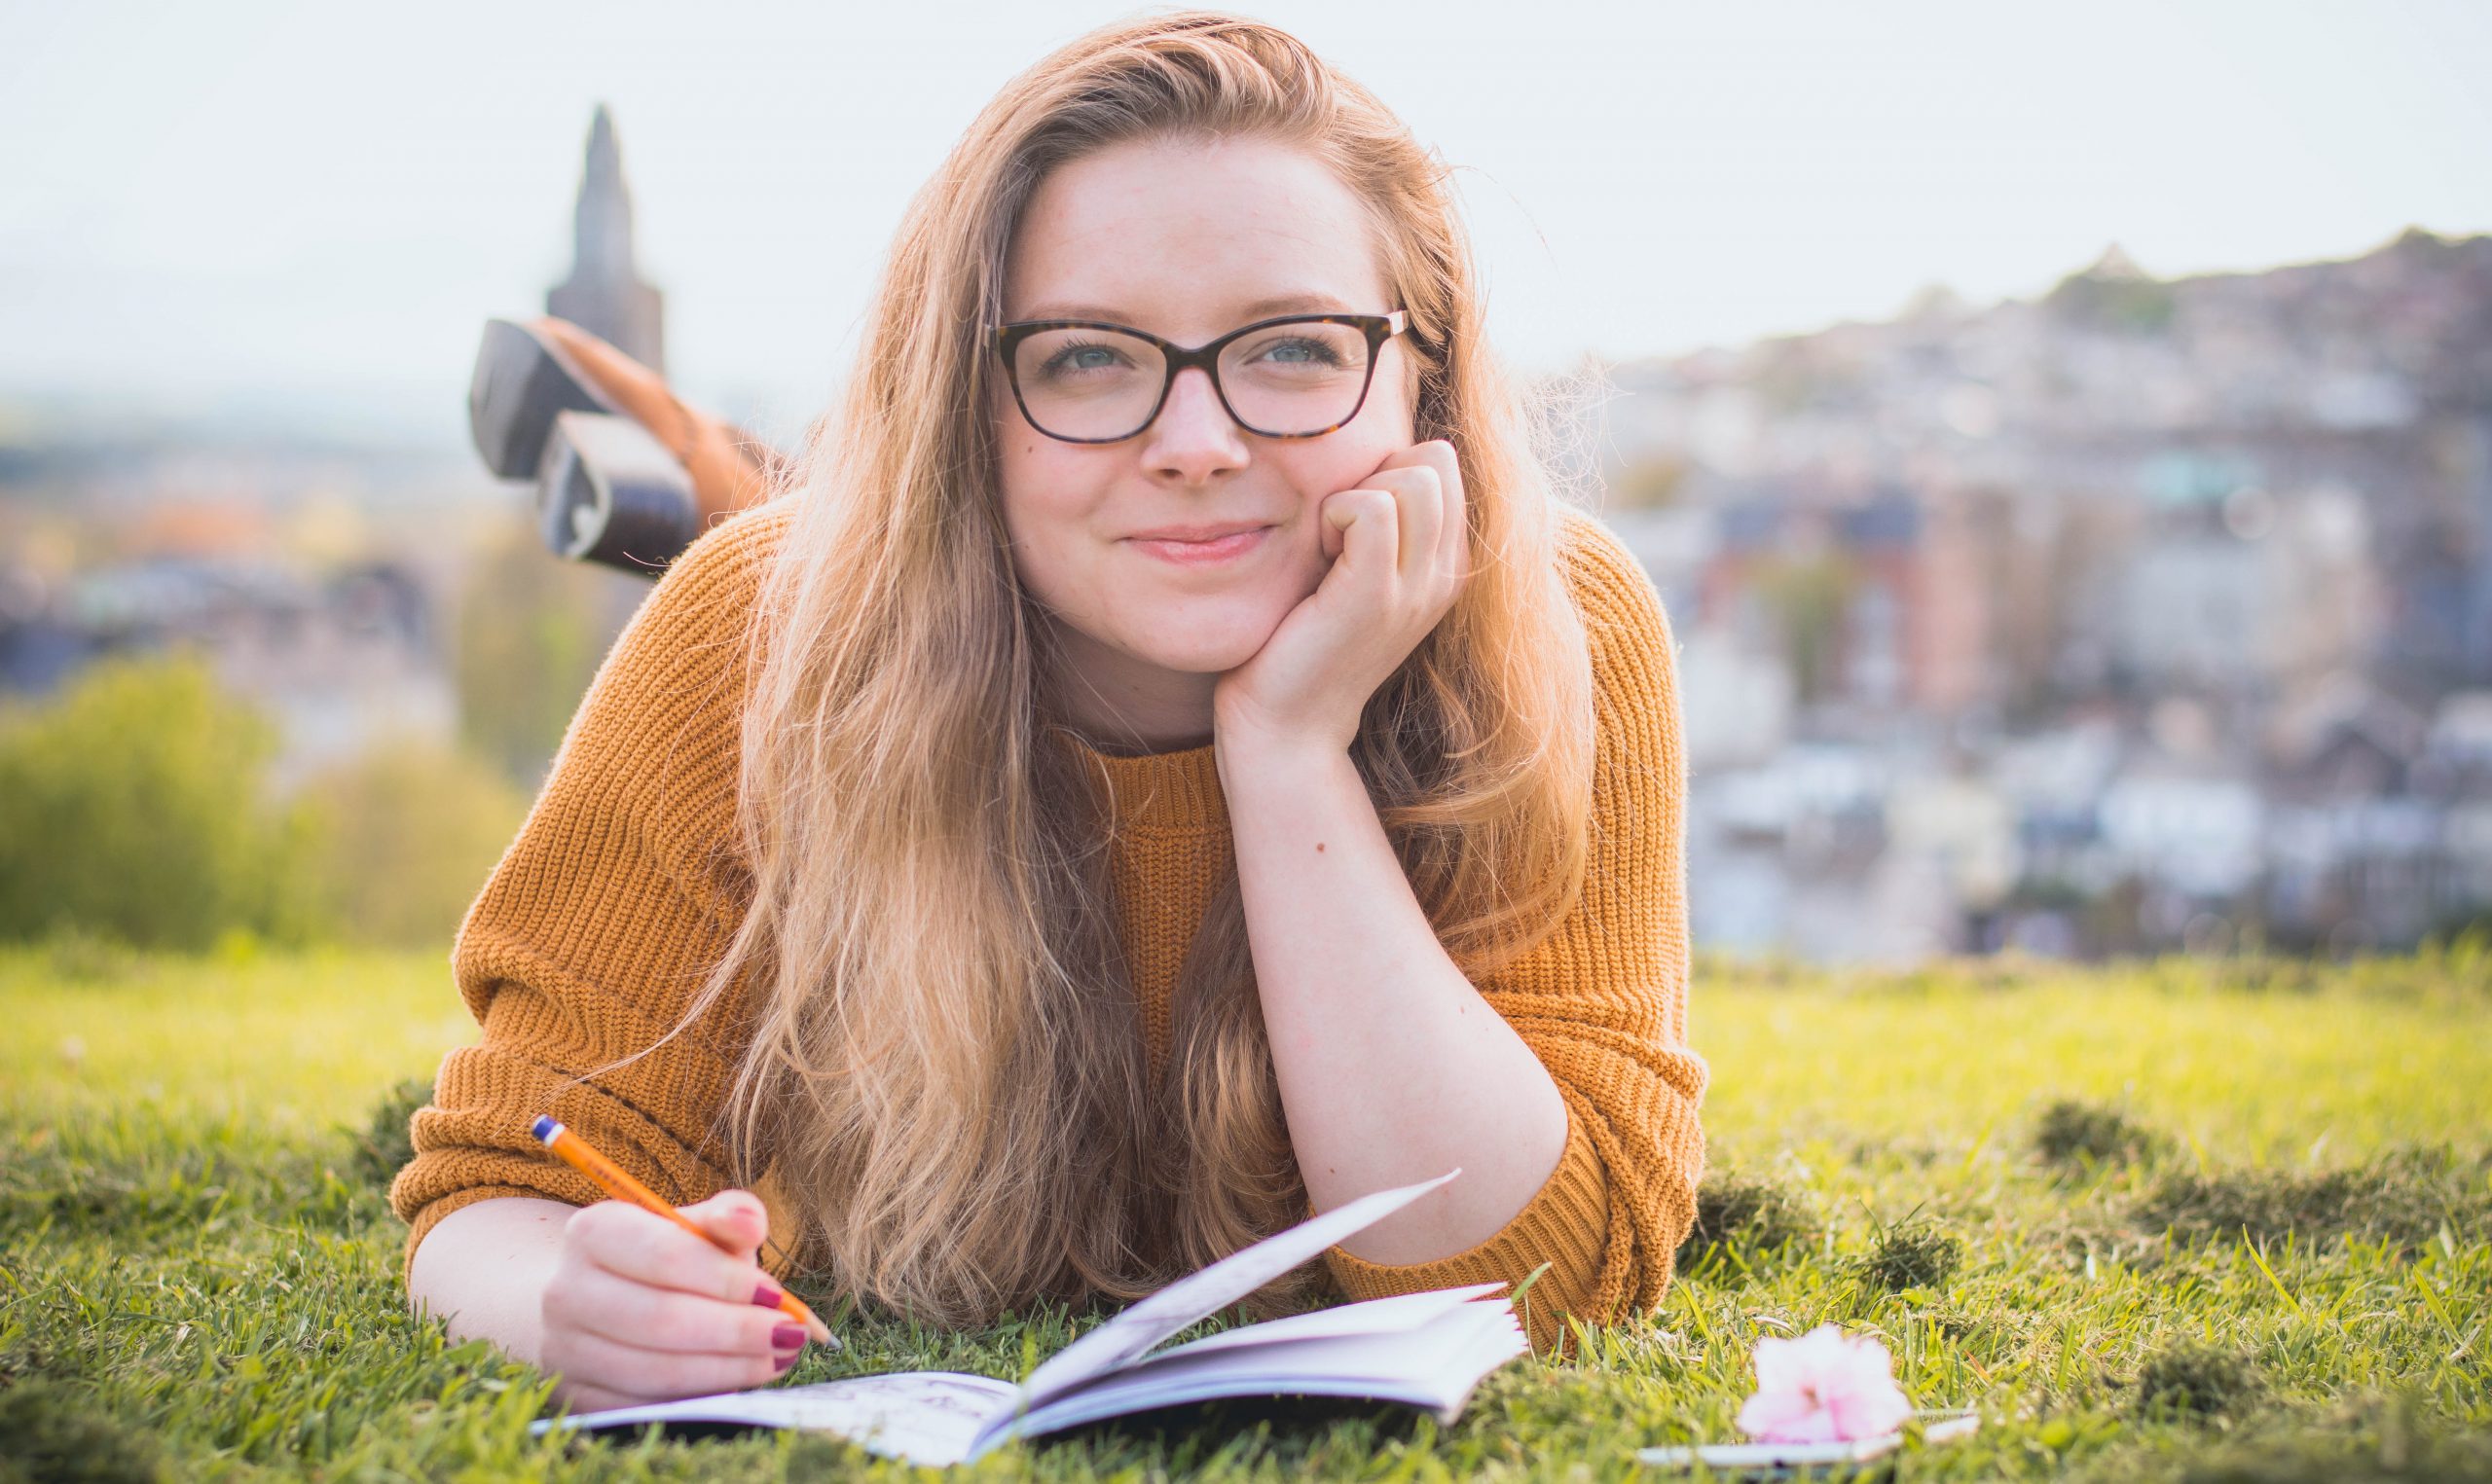 college-woman-lying-on-green-grass-while-holding-pencil-